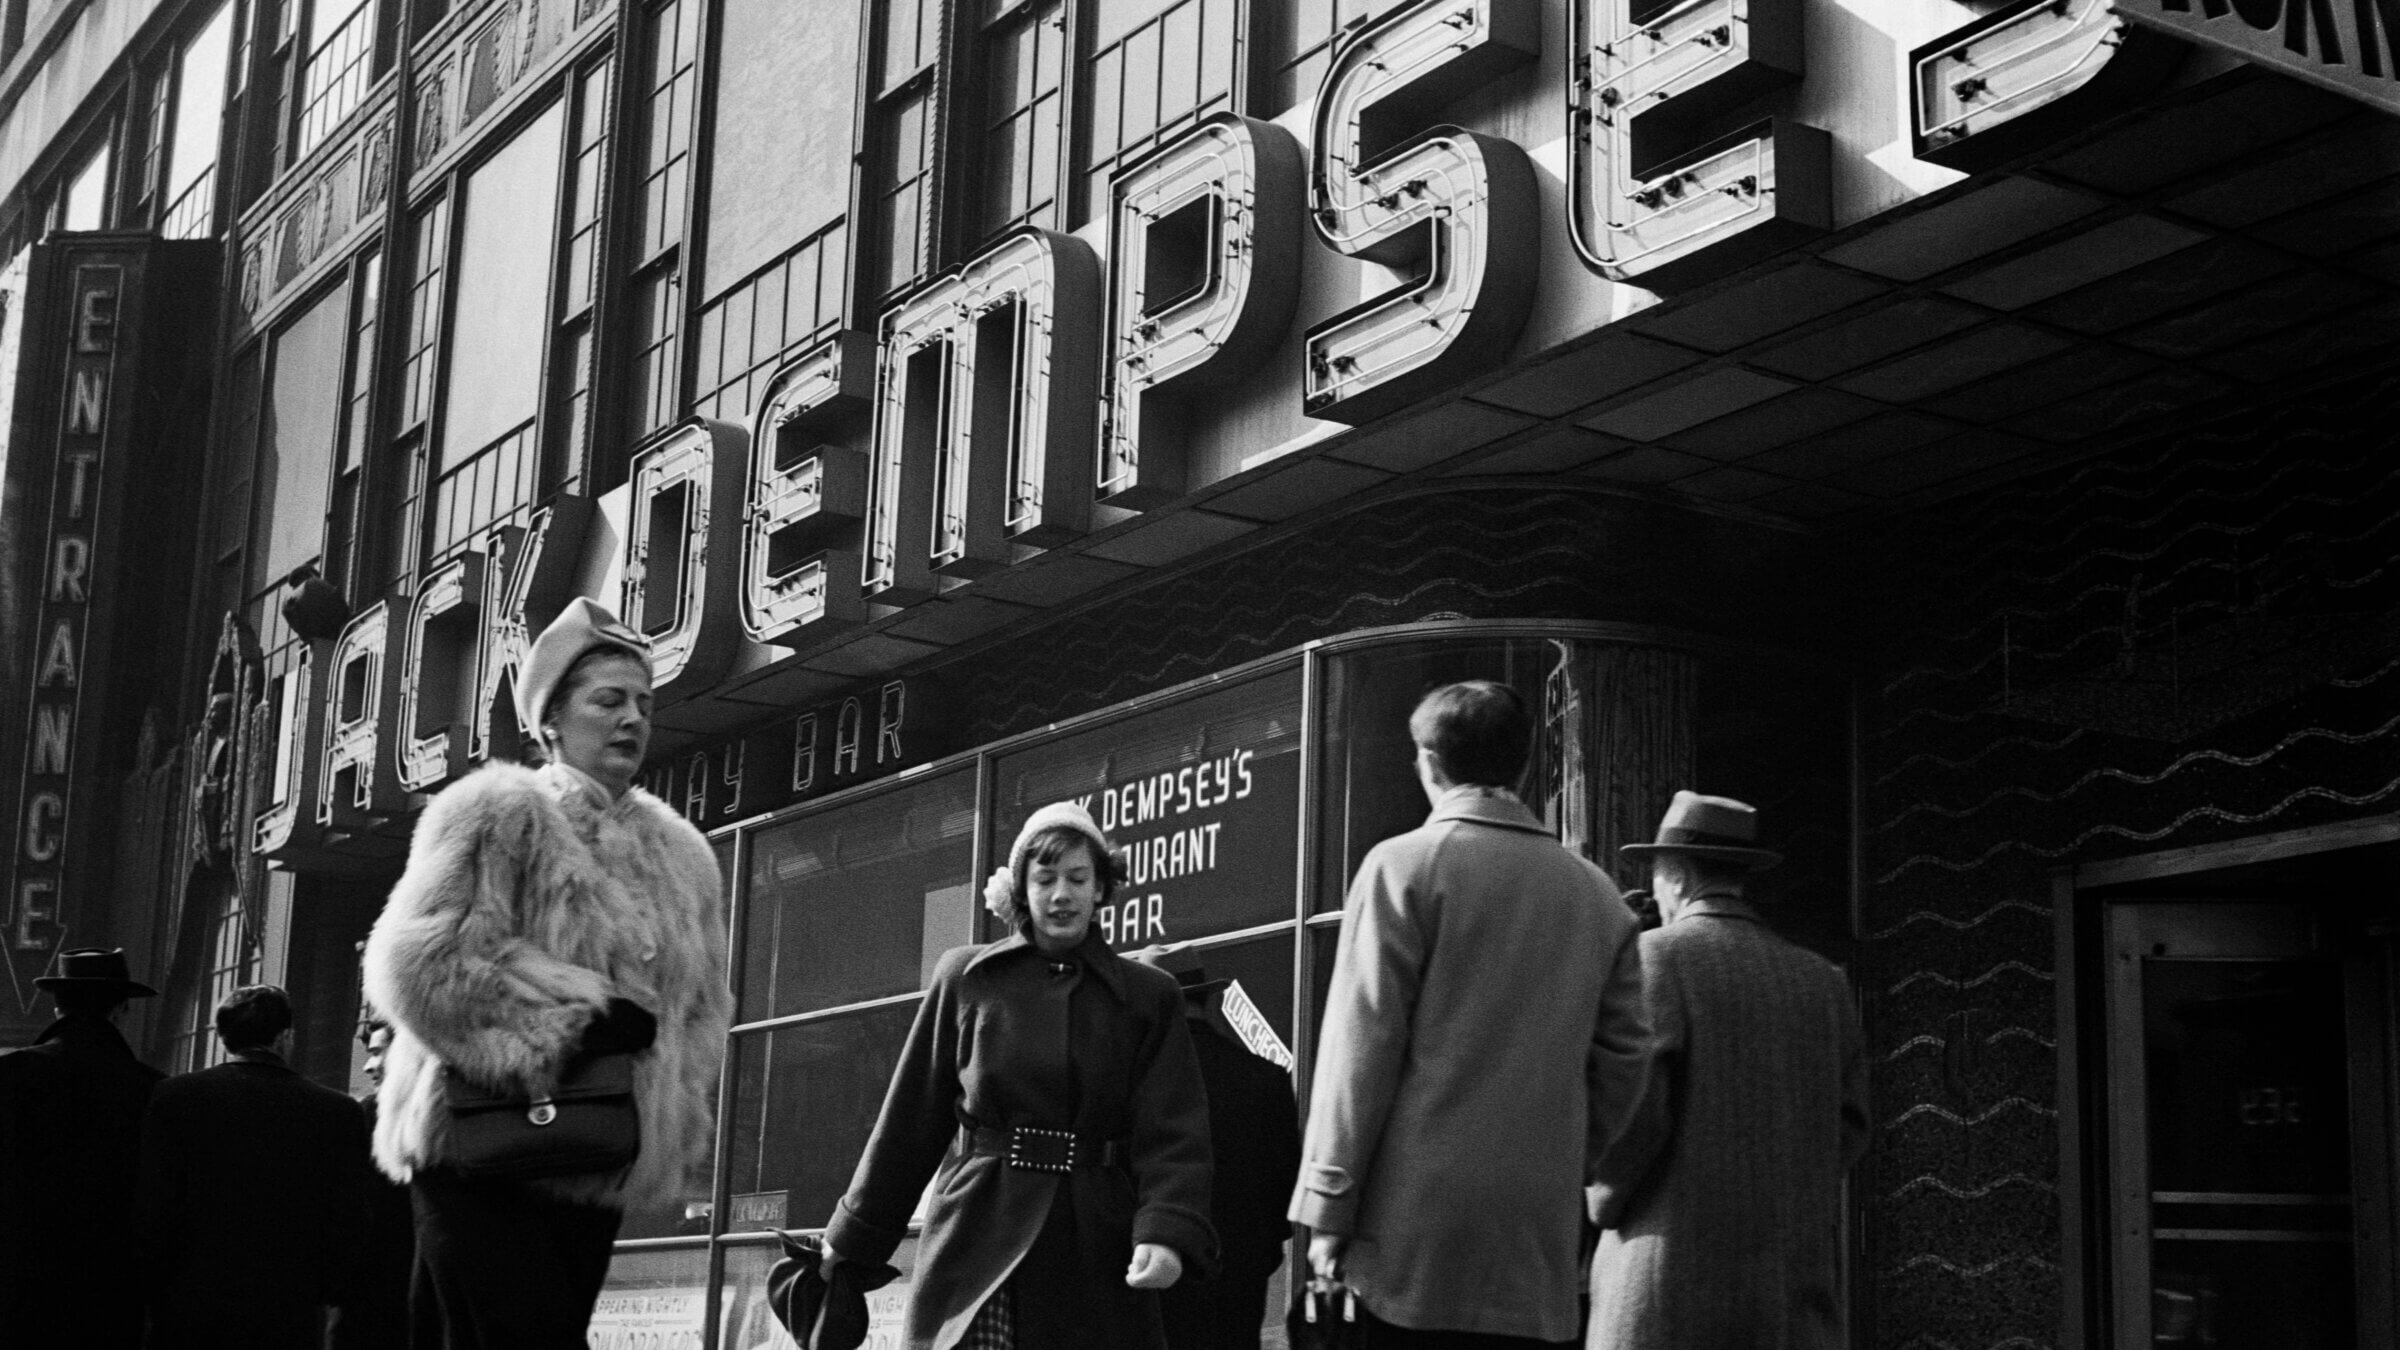 For Brill Building regulars, Jack Dempsey's restaurant was the most convenient spot for cheesecake.